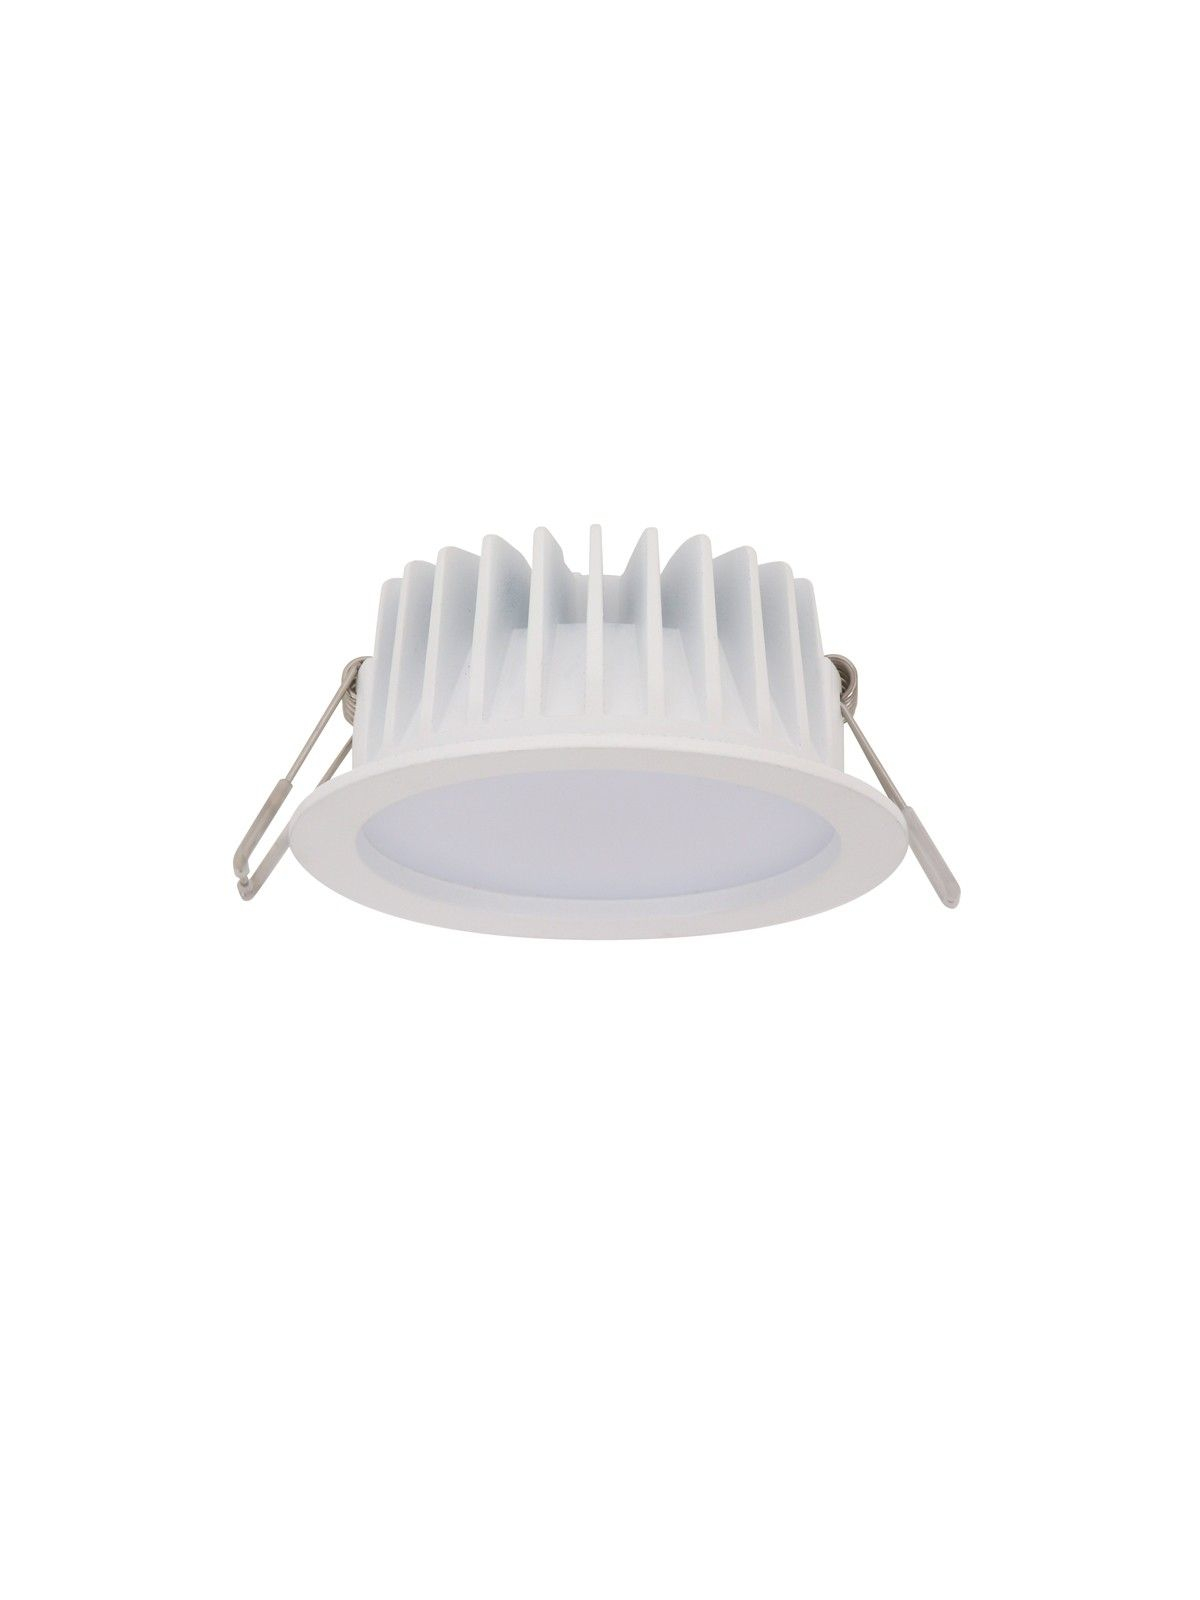 Ledlux Vivid Colour Switch Downlight In White Color Switch with size 1200 X 1600